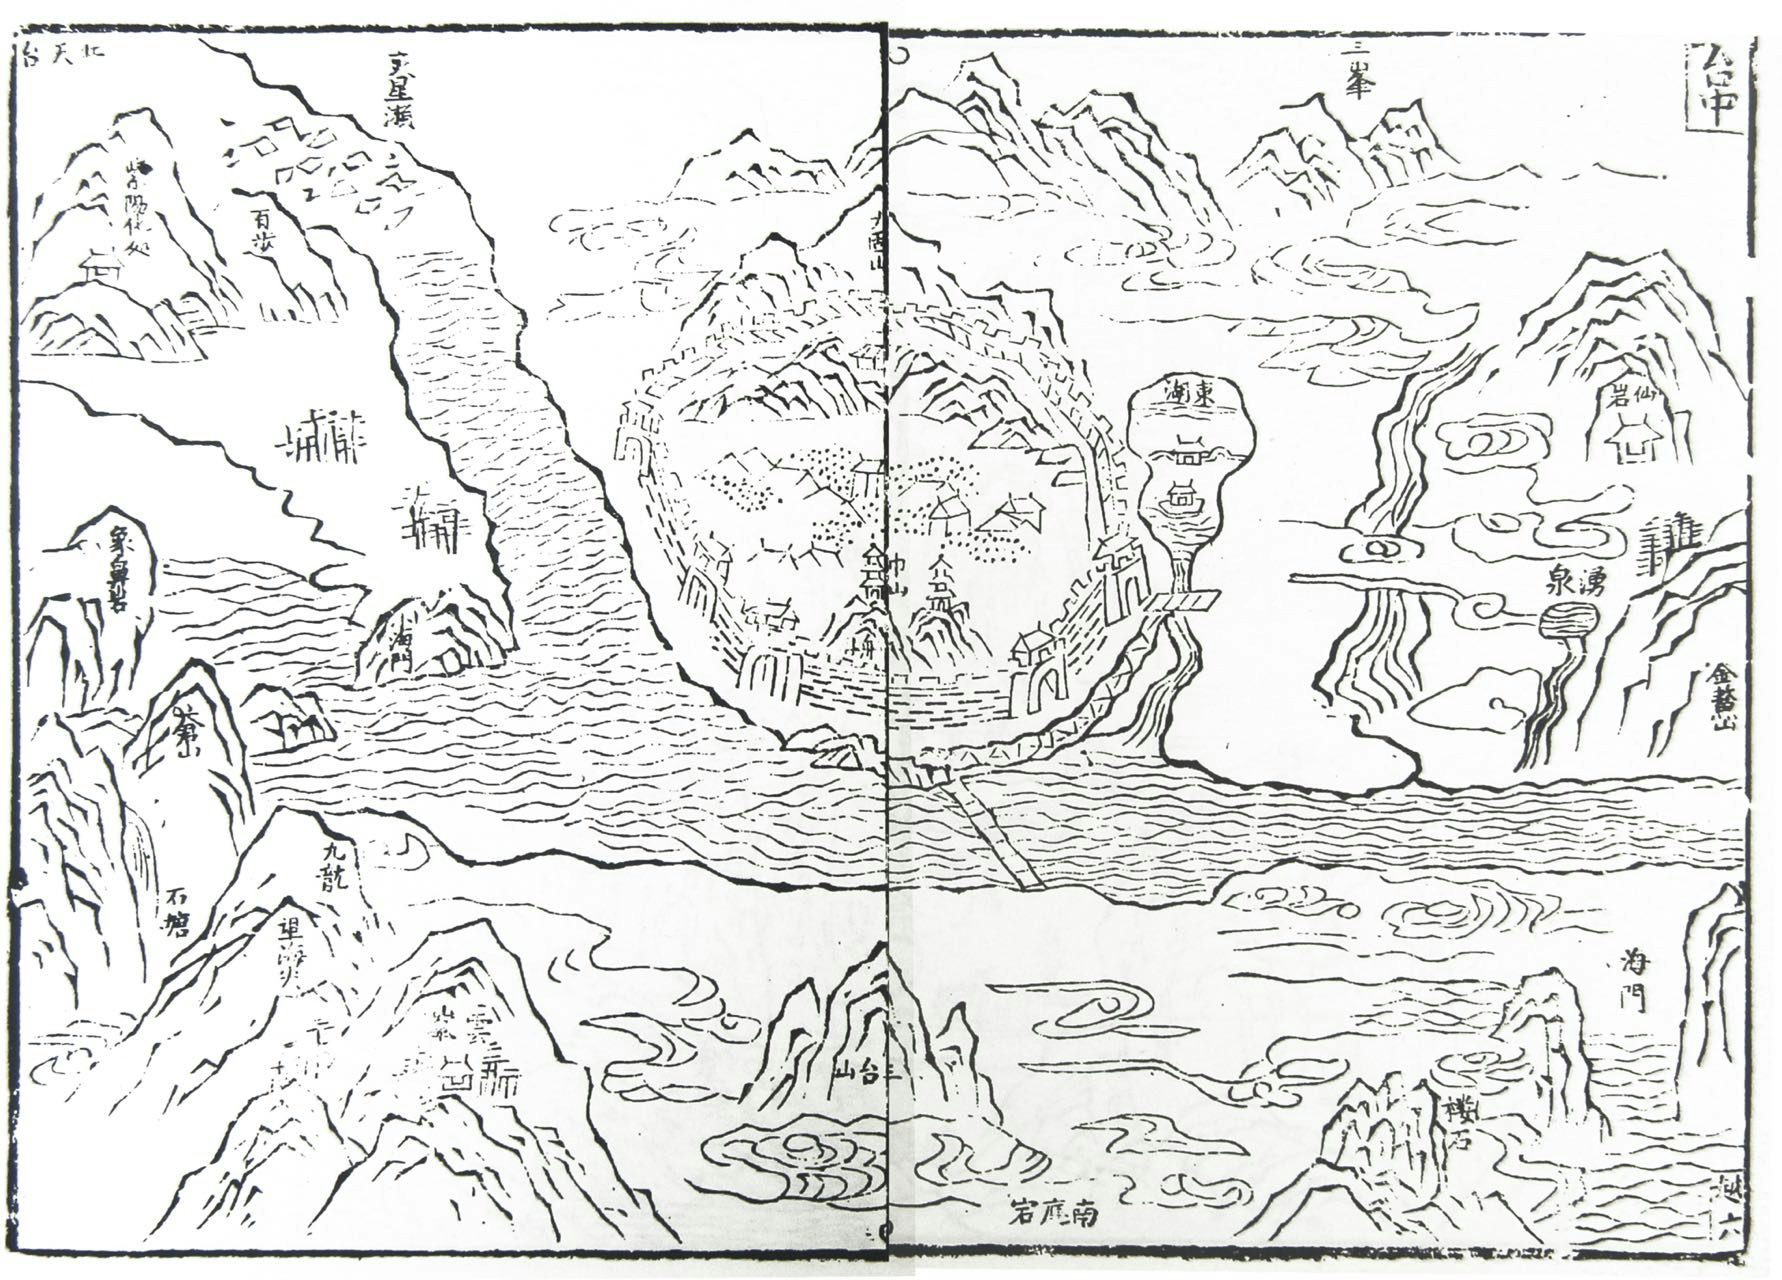 Image 1, A map of Linhai, from Linhai Chronicles in China’s Republican Era, Courtesy of Fengyuan Tian and With in/out Linhai